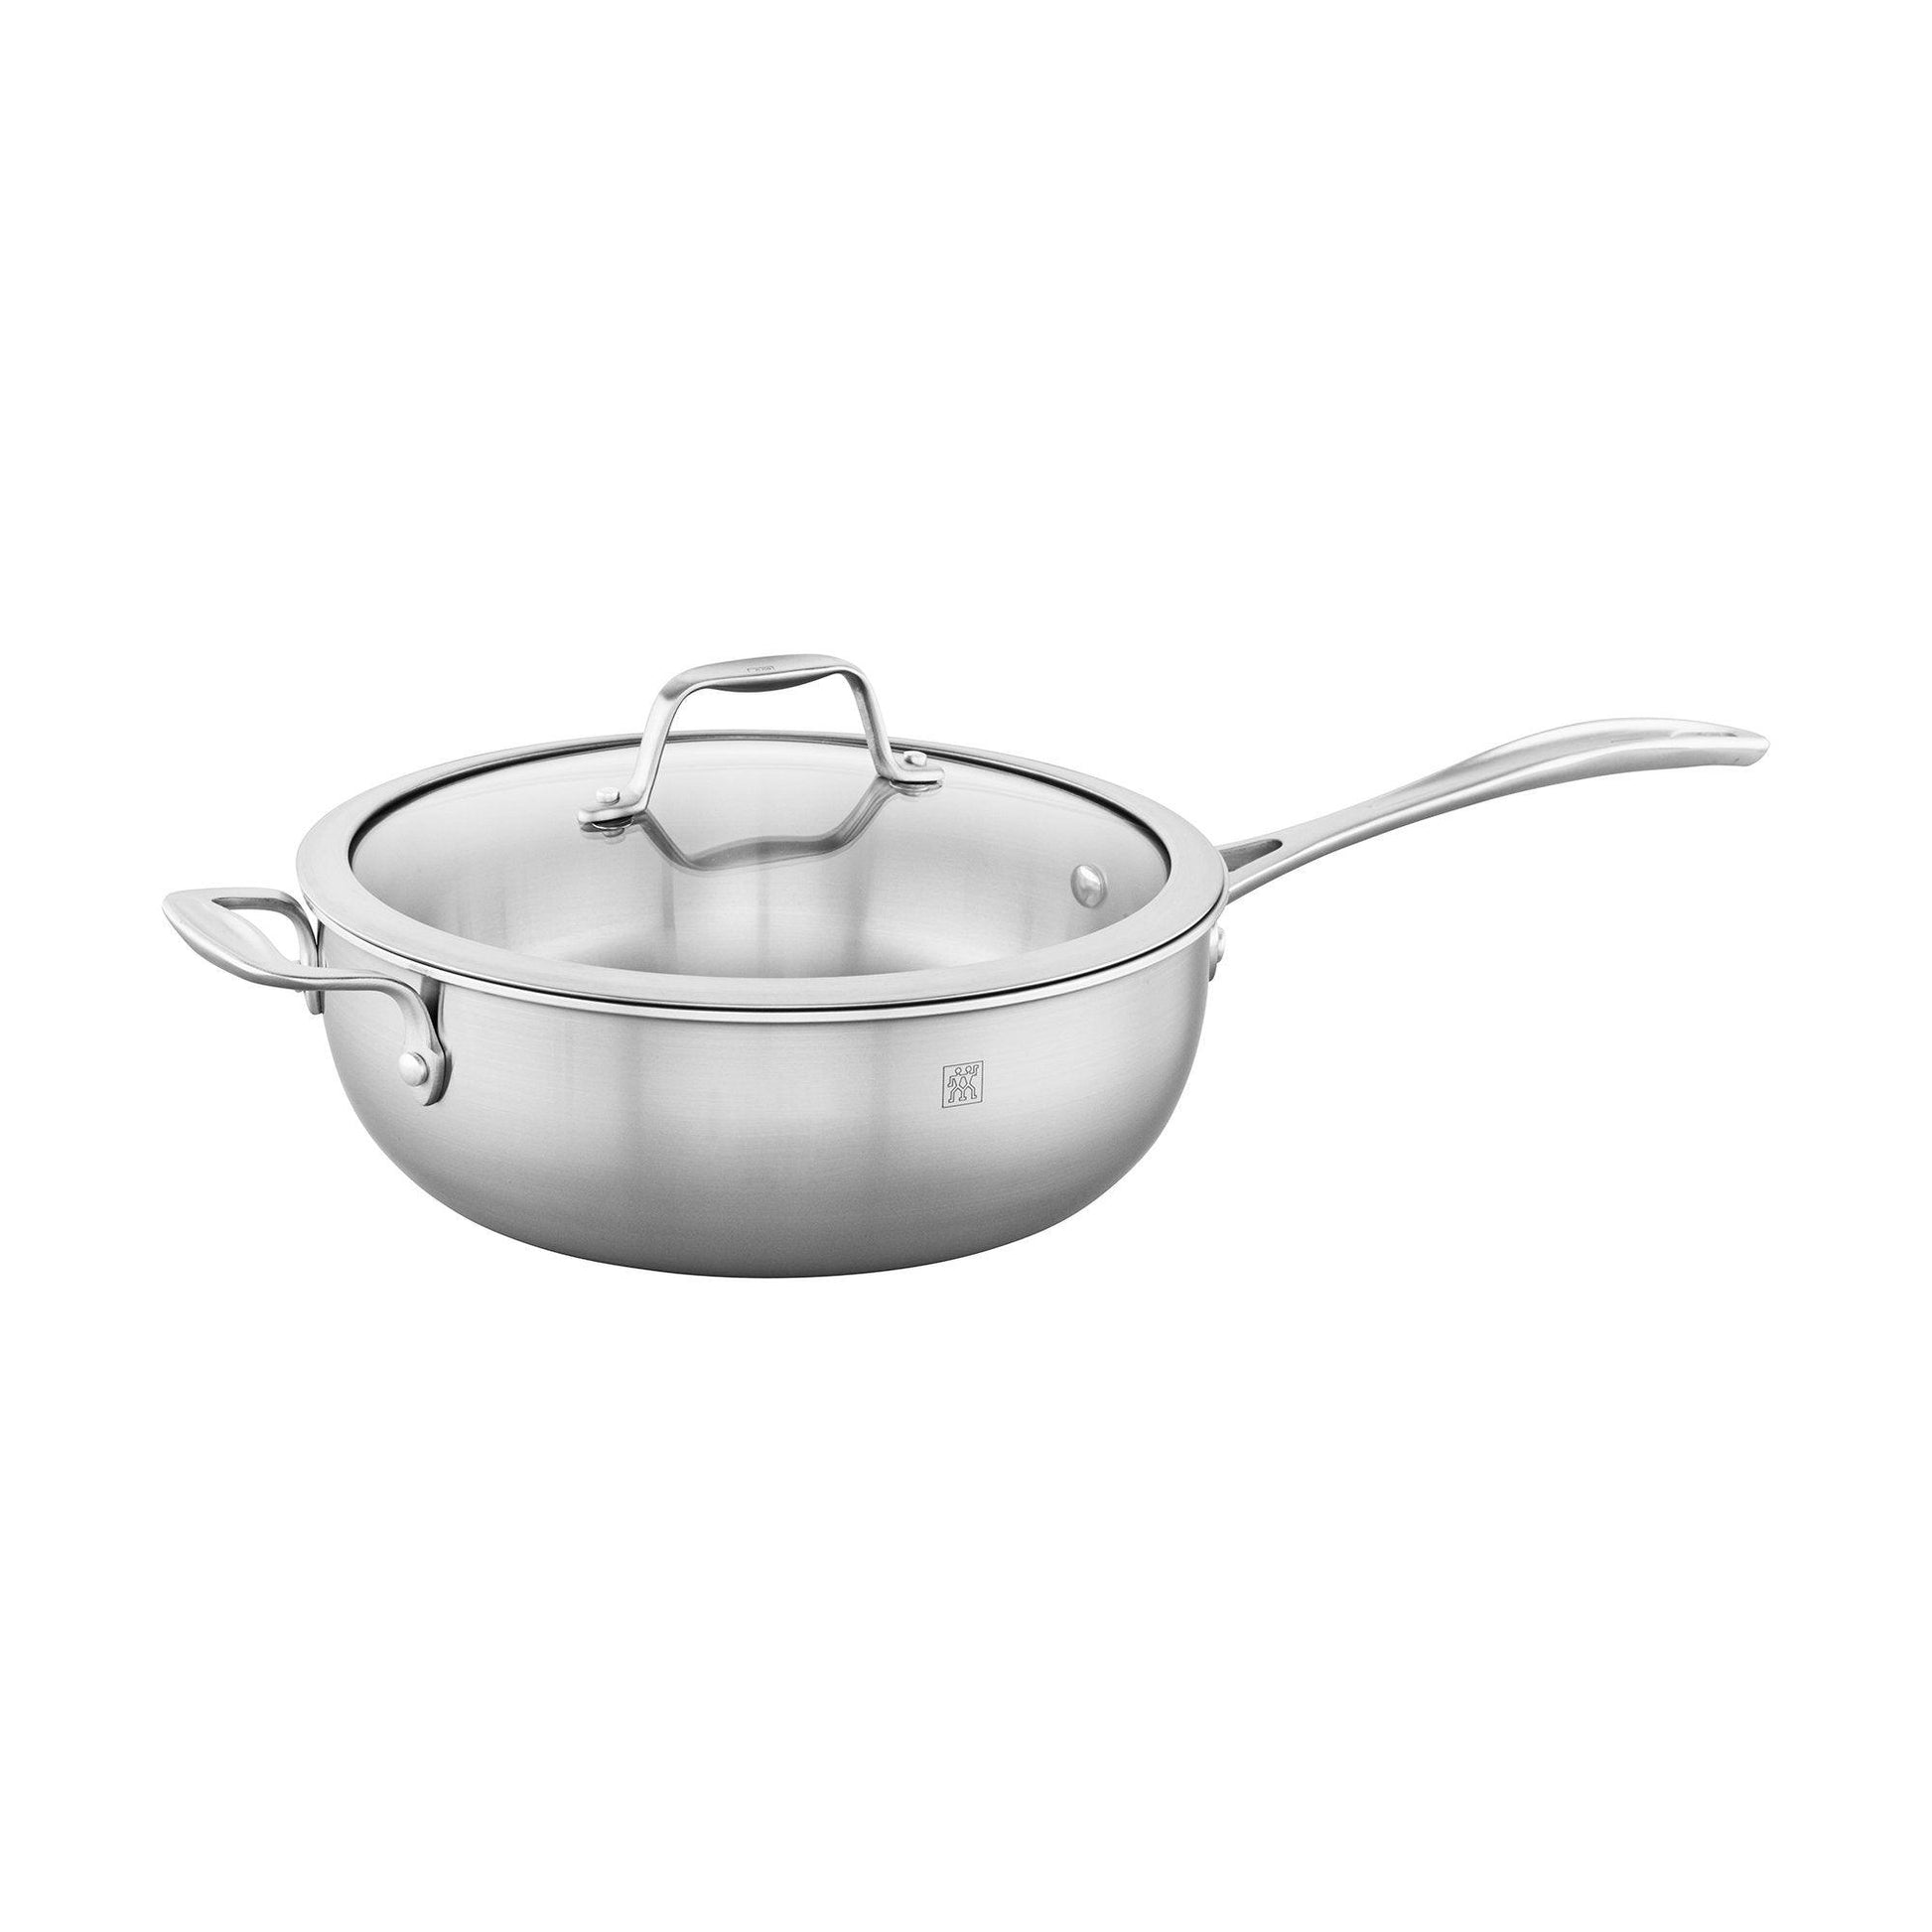 ZWILLING Spirit Stainless Perfect Pan, 4.6-qt, Stainless Steel - CookCave